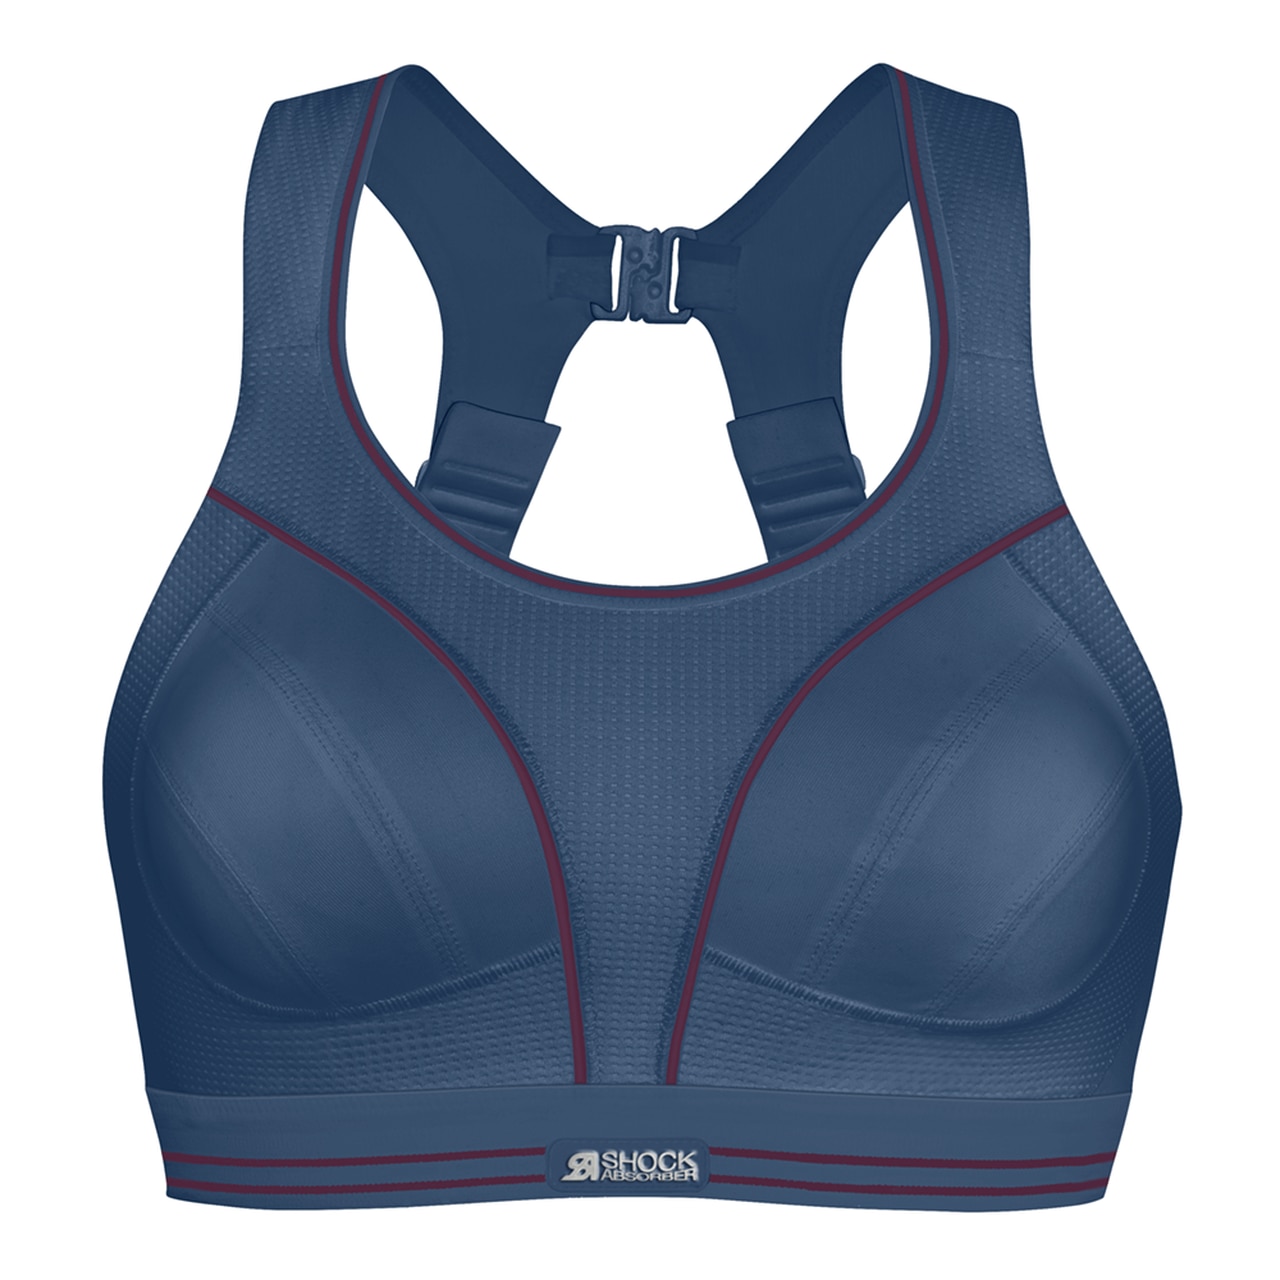 An Honest Review of the Shock Absorber Sports Bra | Who What Wear UK